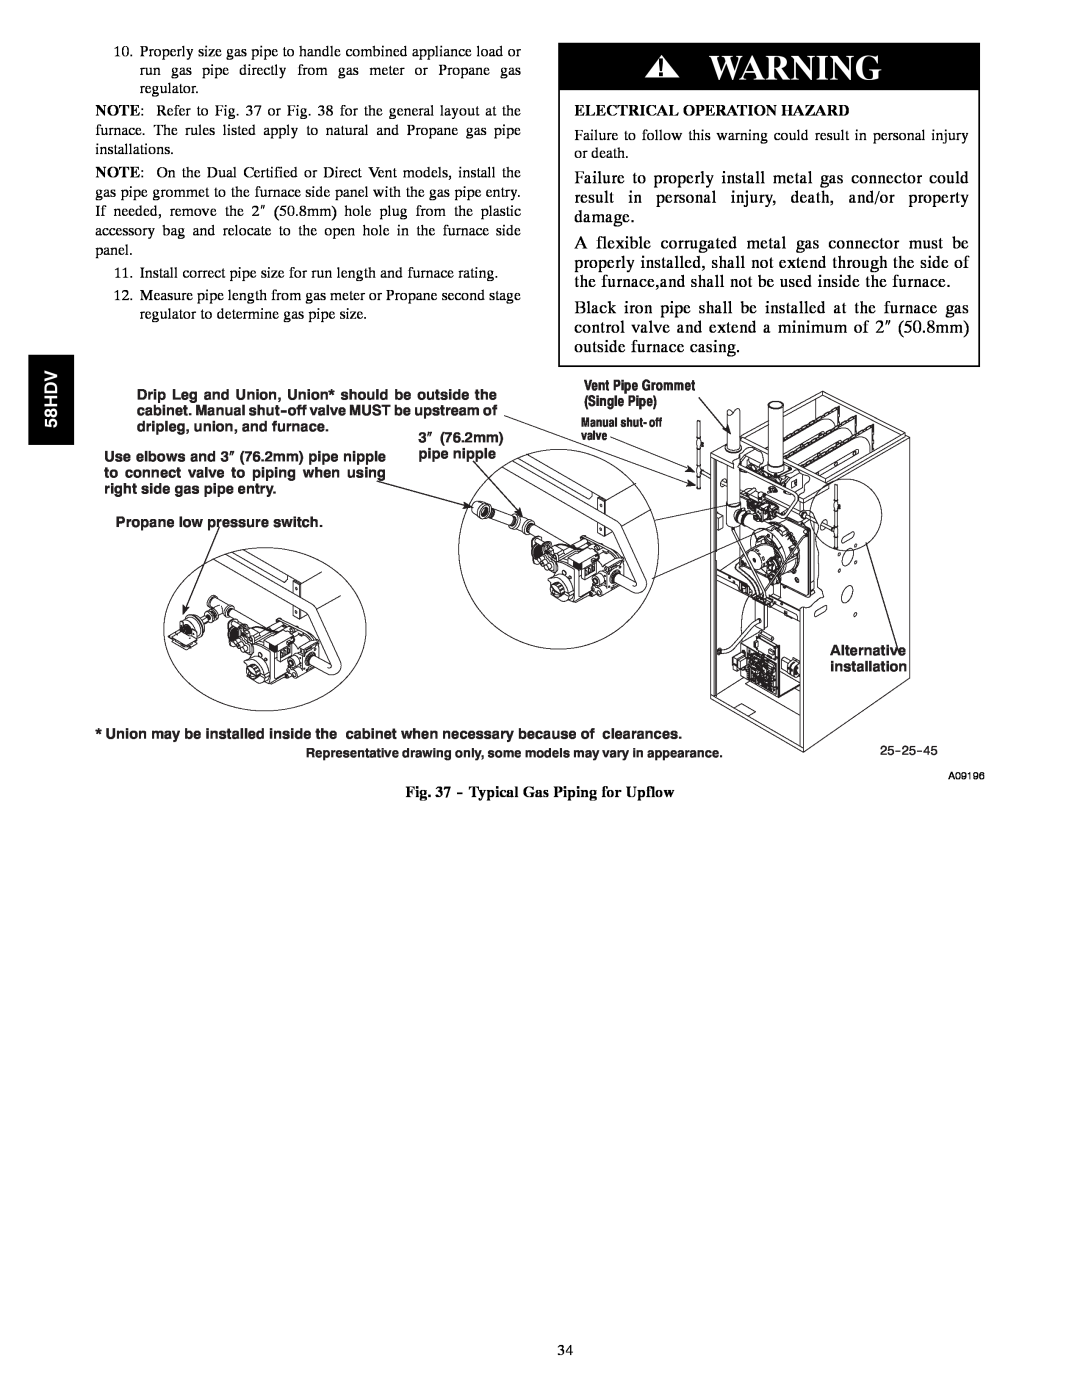 Carrier 58HDV installation instructions Electrical Operation Hazard, Typical Gas Piping for Upflow 